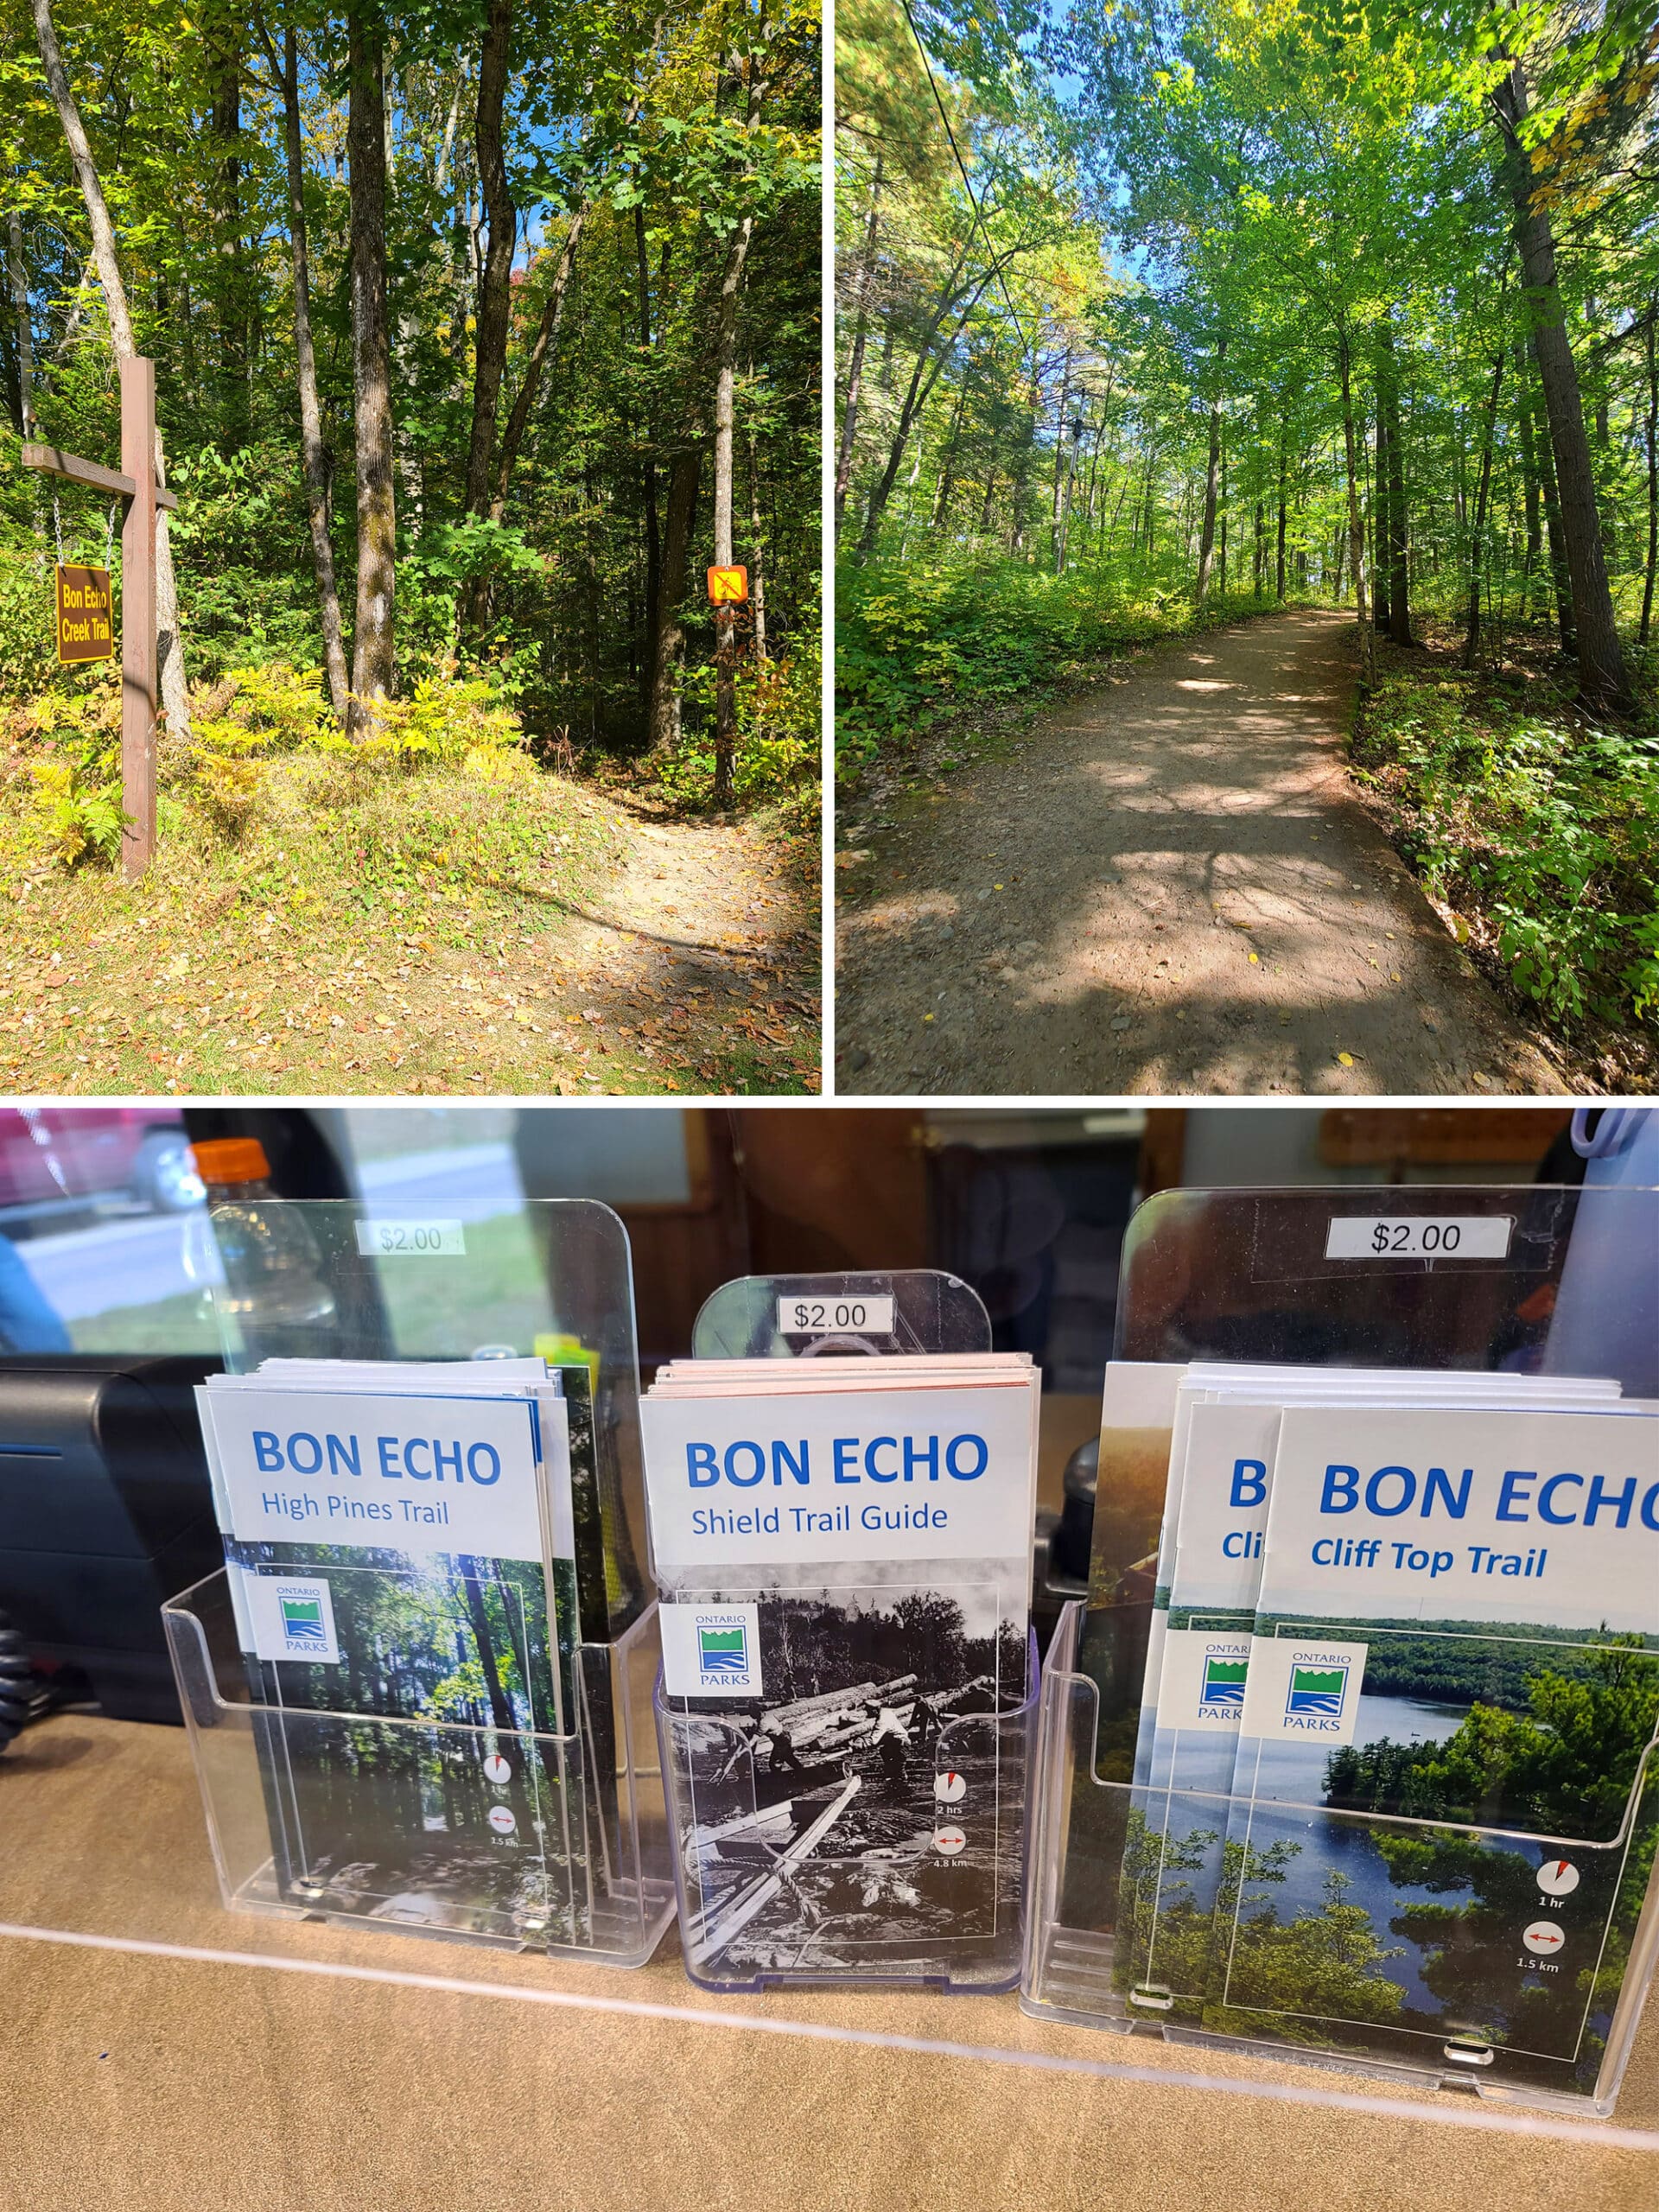 3 part image showing a couple of the trails at Bon echo, and a row of trail brochures.